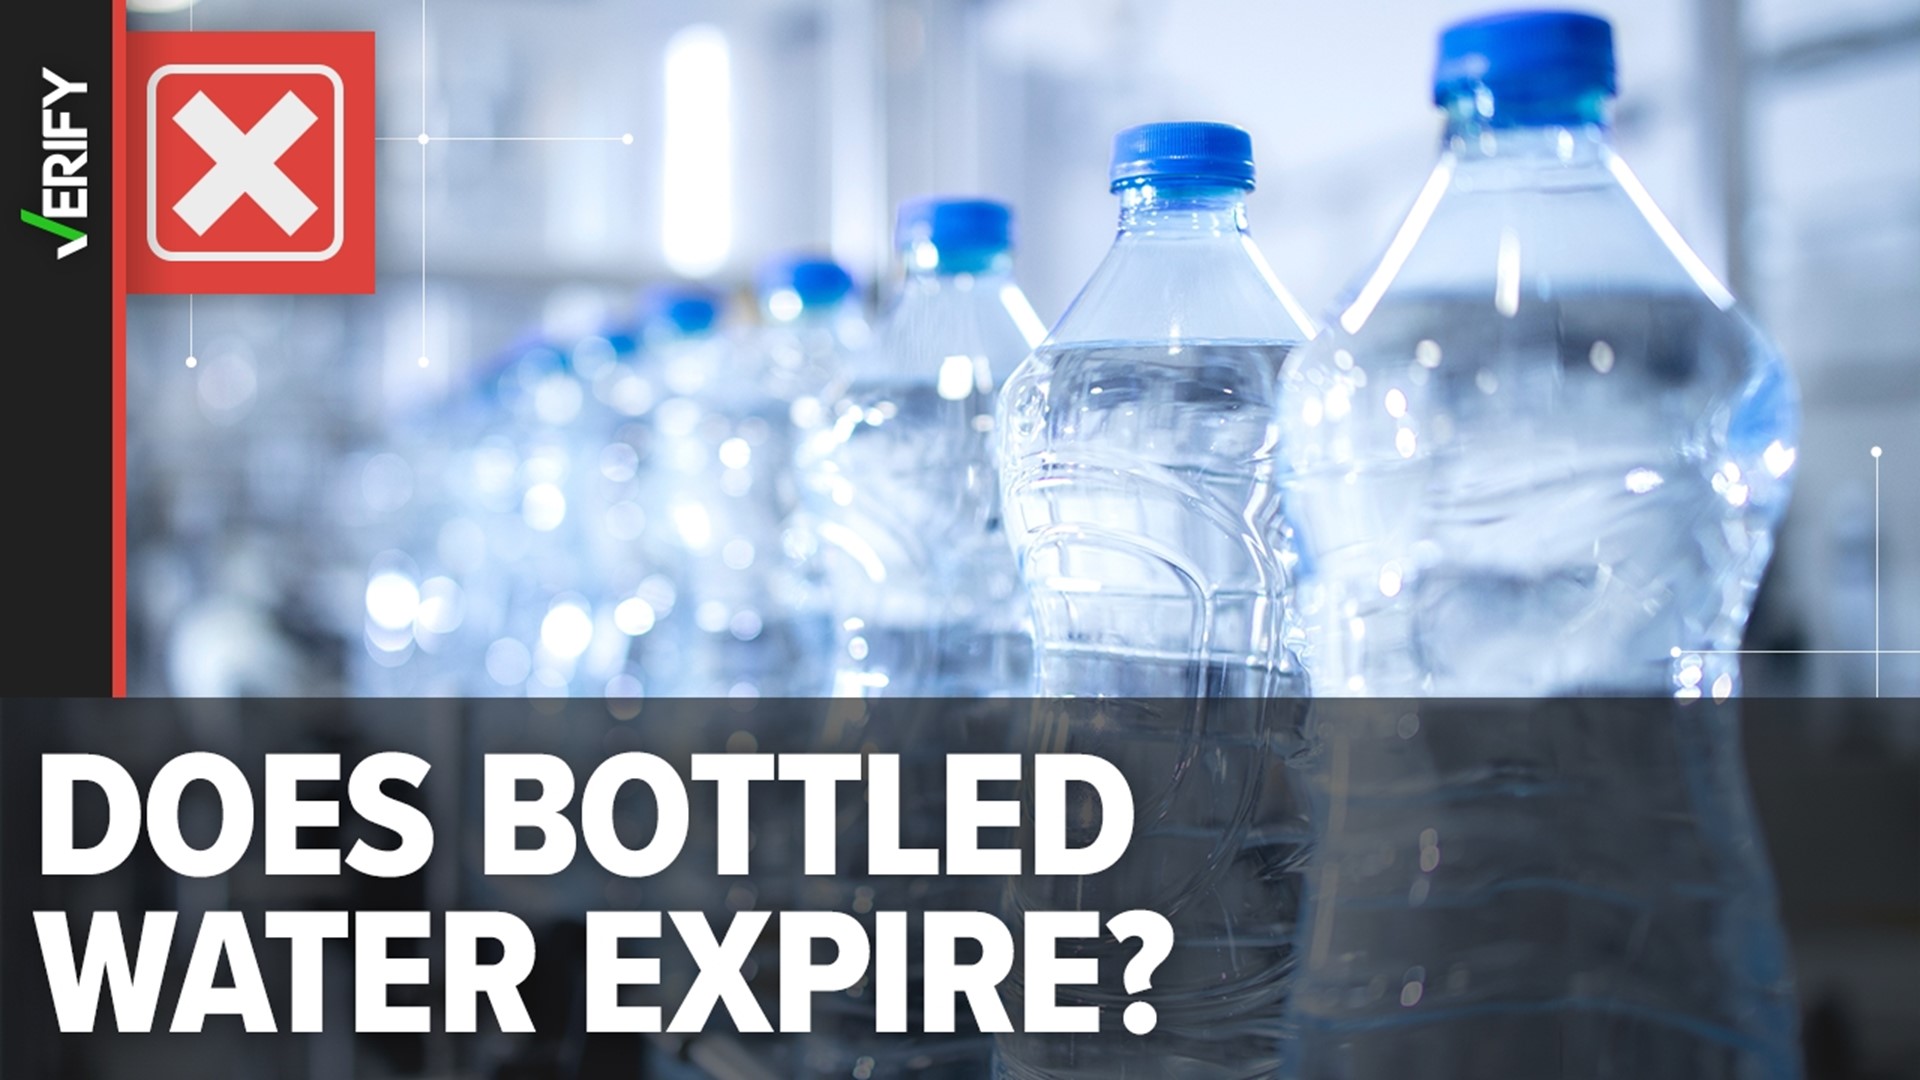 Properly stored, unopened bottled water doesn't expire